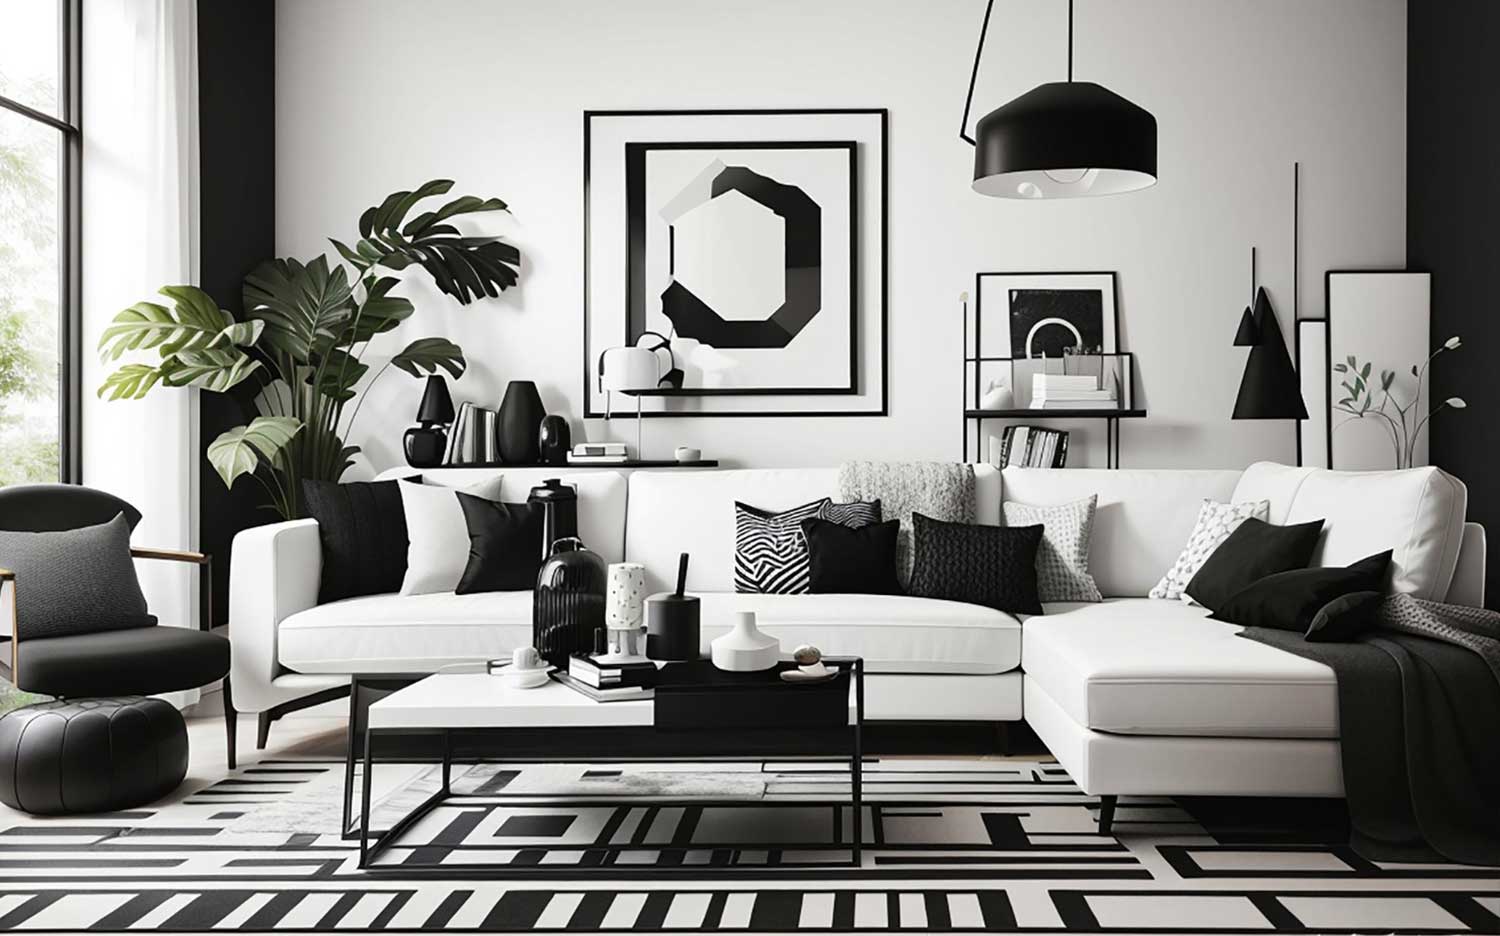 Living room done in black and white furniture and decor